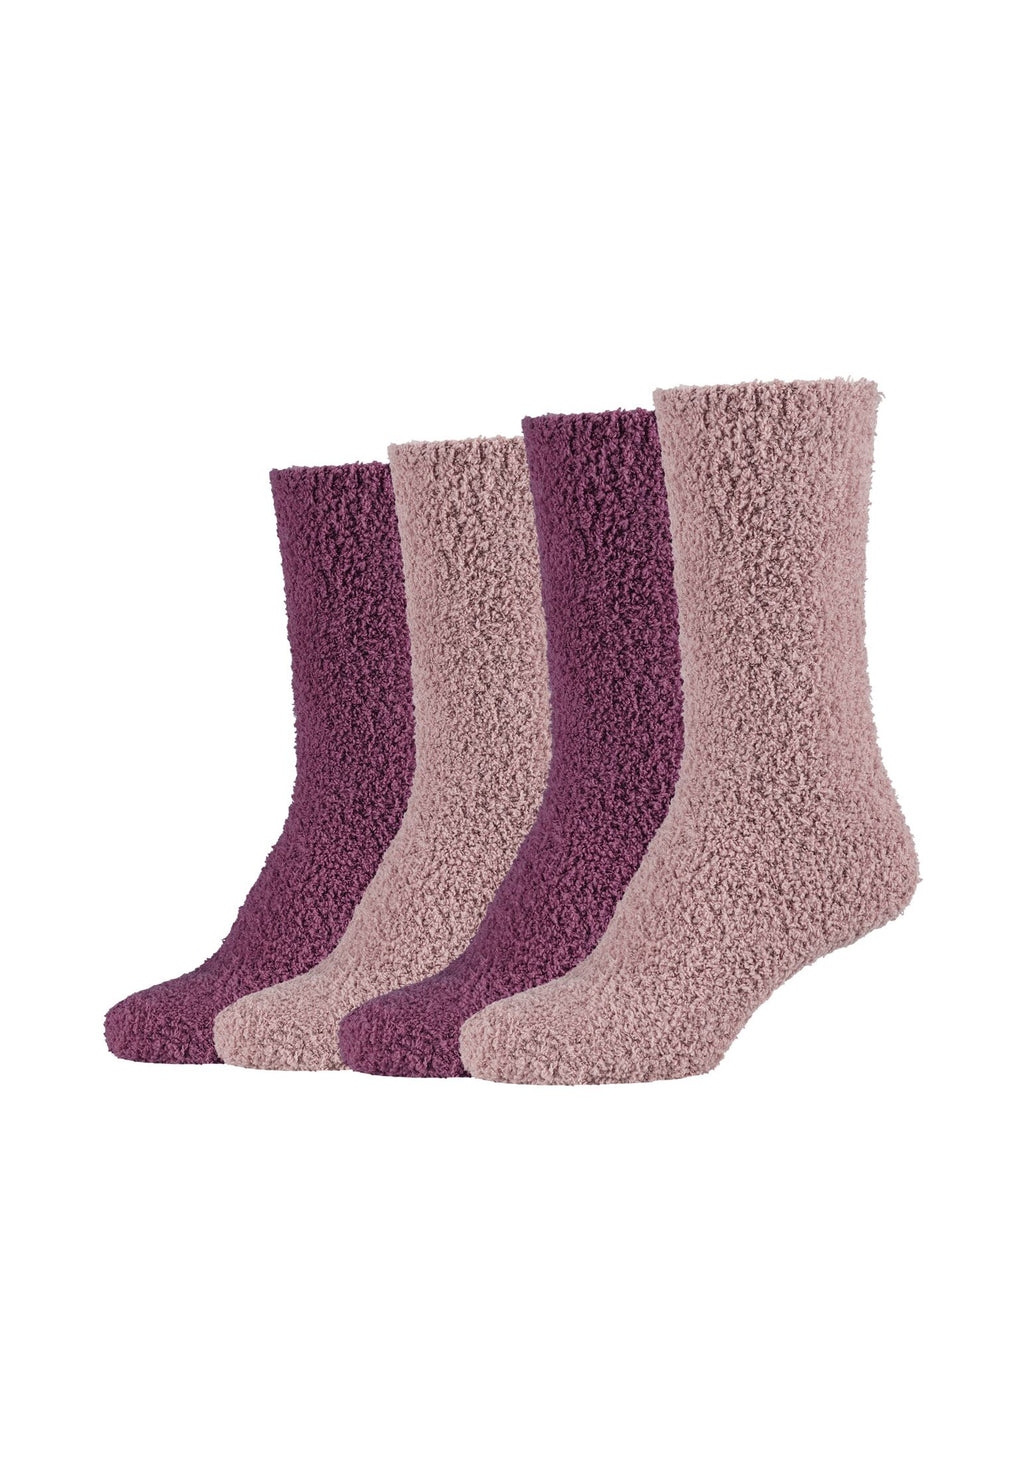 Socken mit ONSKINERY Polyester 4er Pack – Cosy Recycled